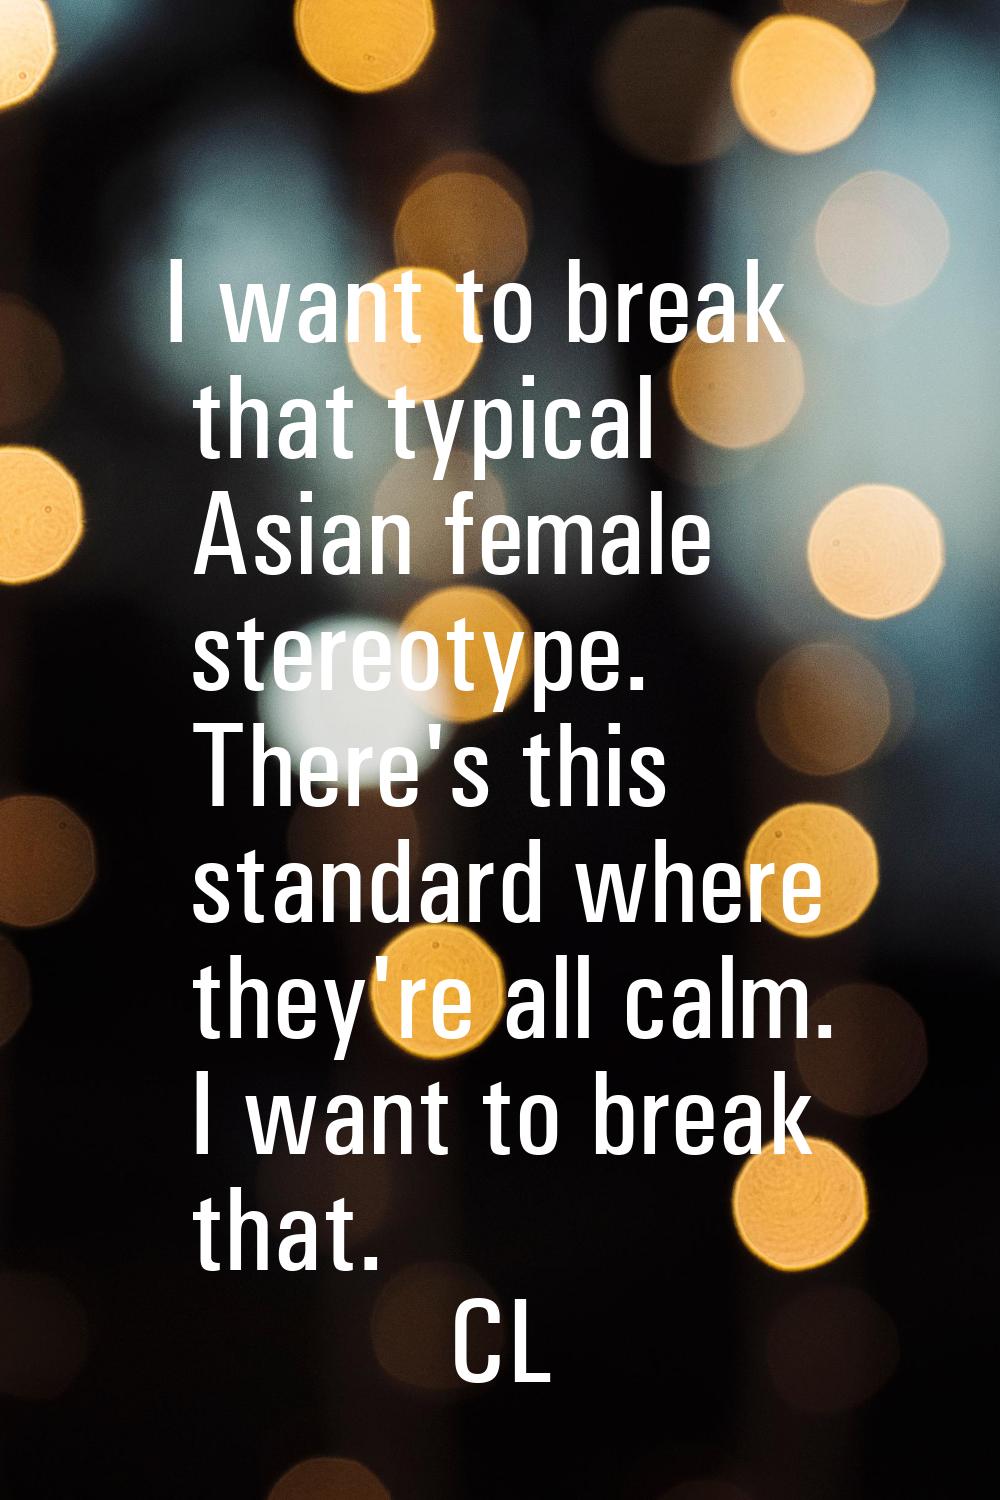 I want to break that typical Asian female stereotype. There's this standard where they're all calm.